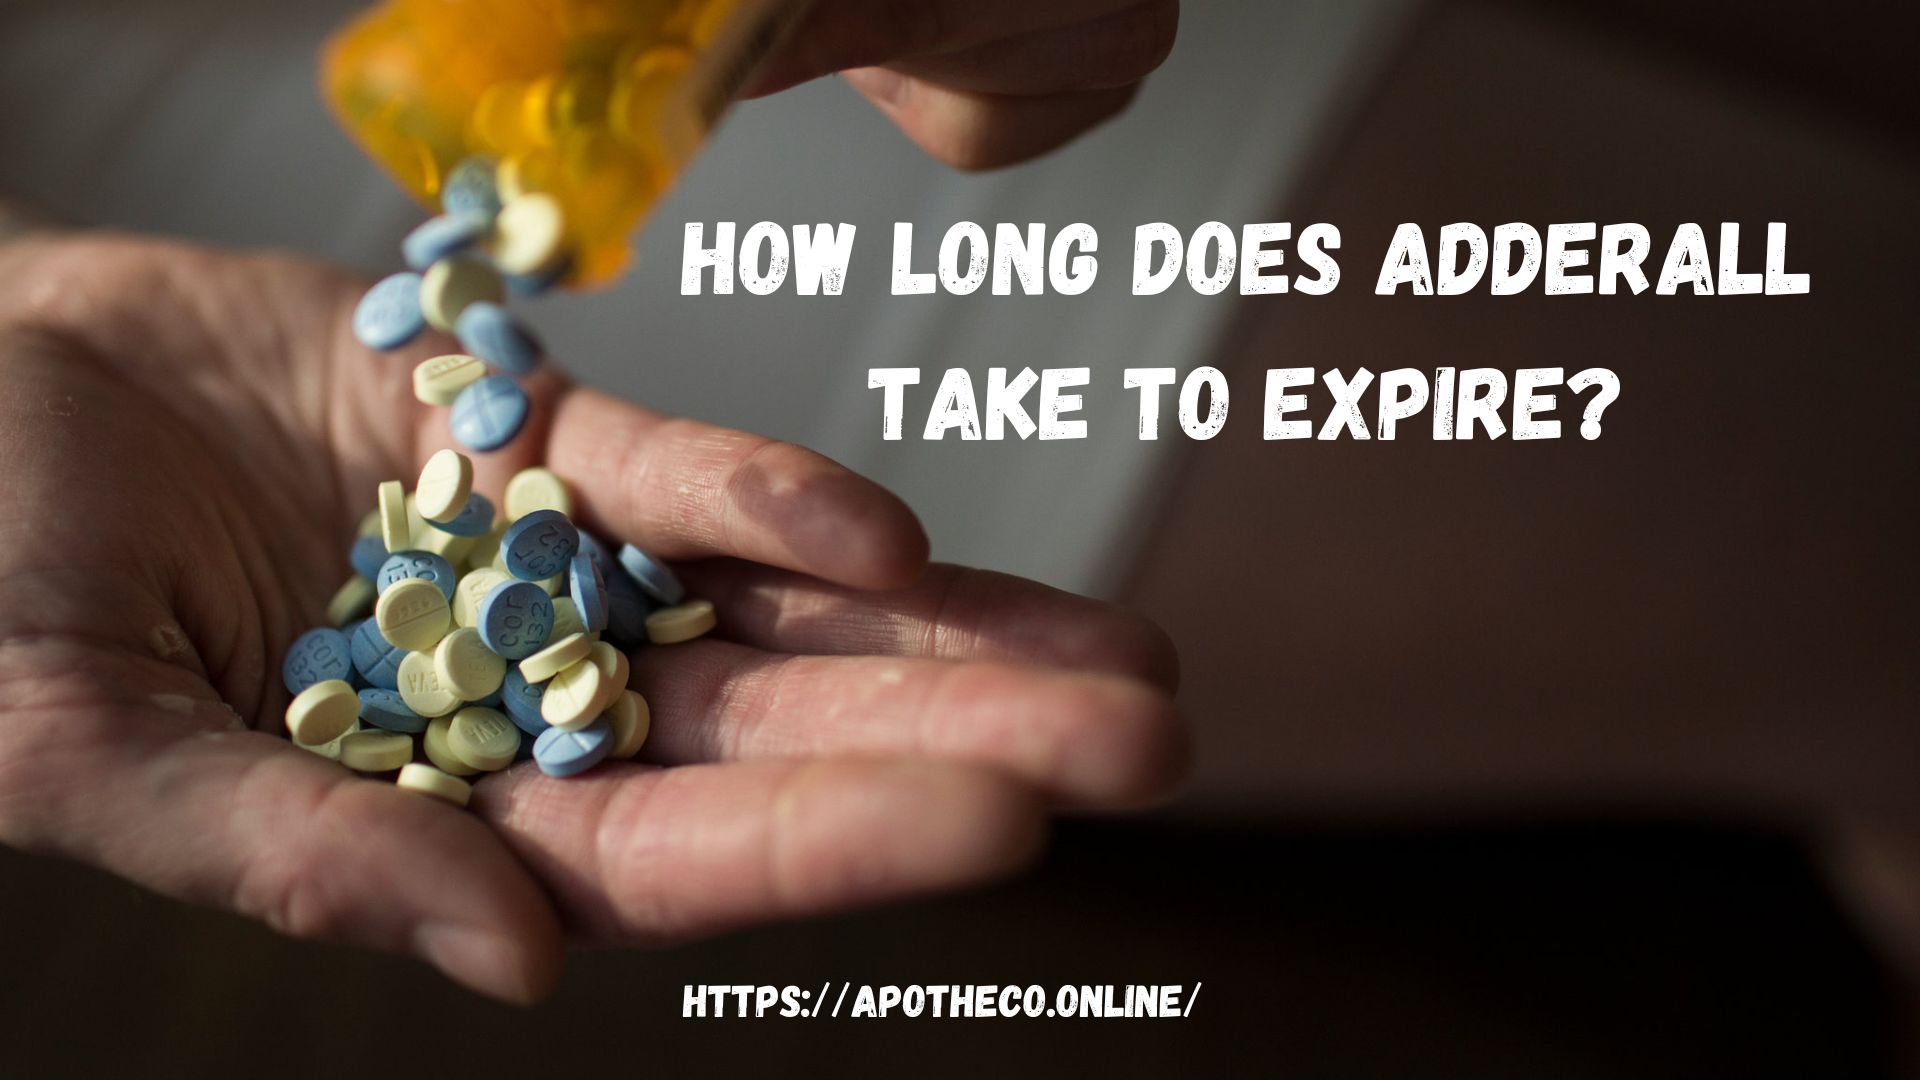 How long does Adderall take to expire?